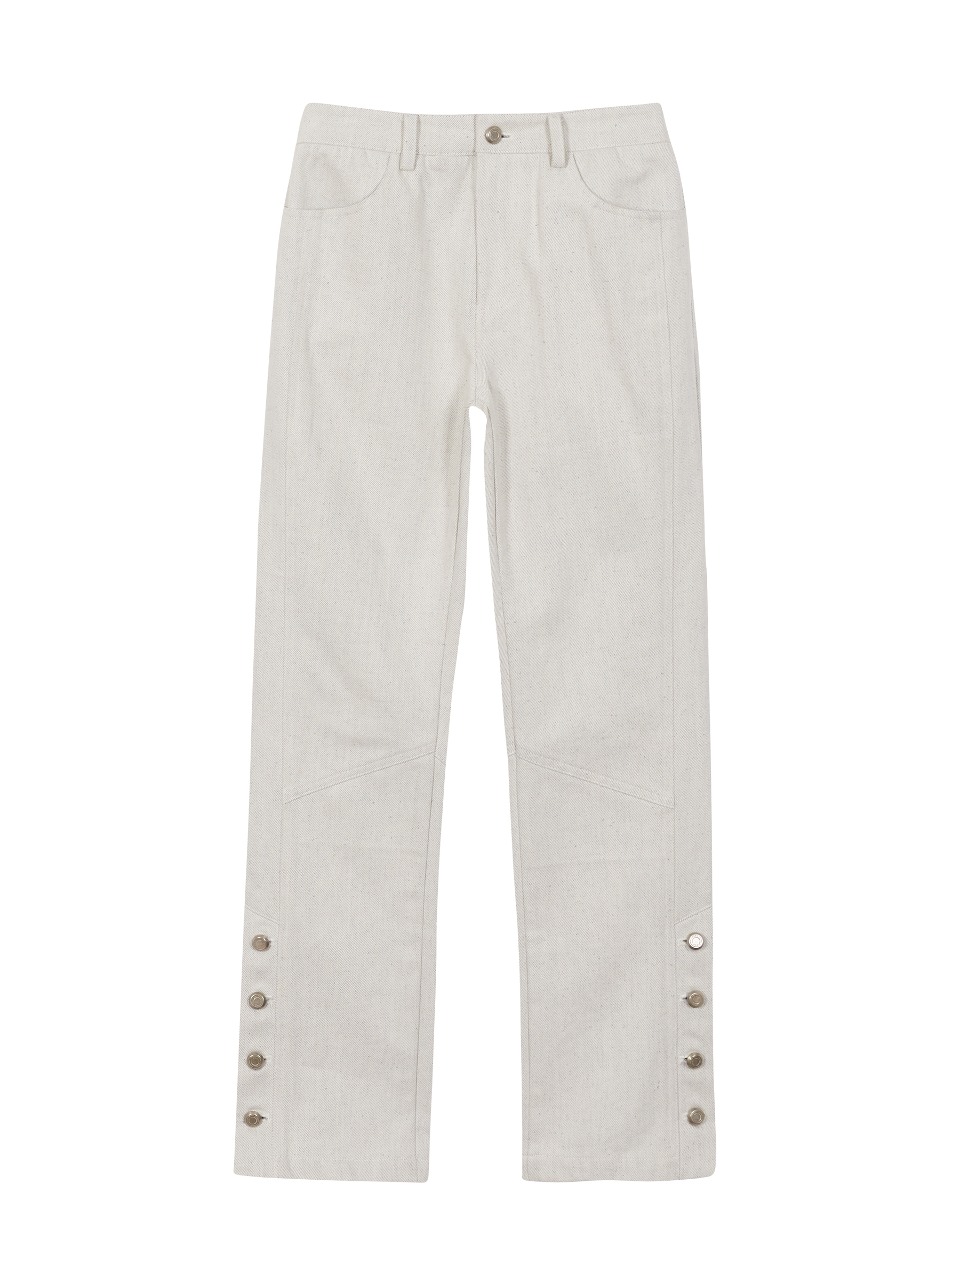 SIDE OPEN STRAIGHT FIT PANTS_IVORY